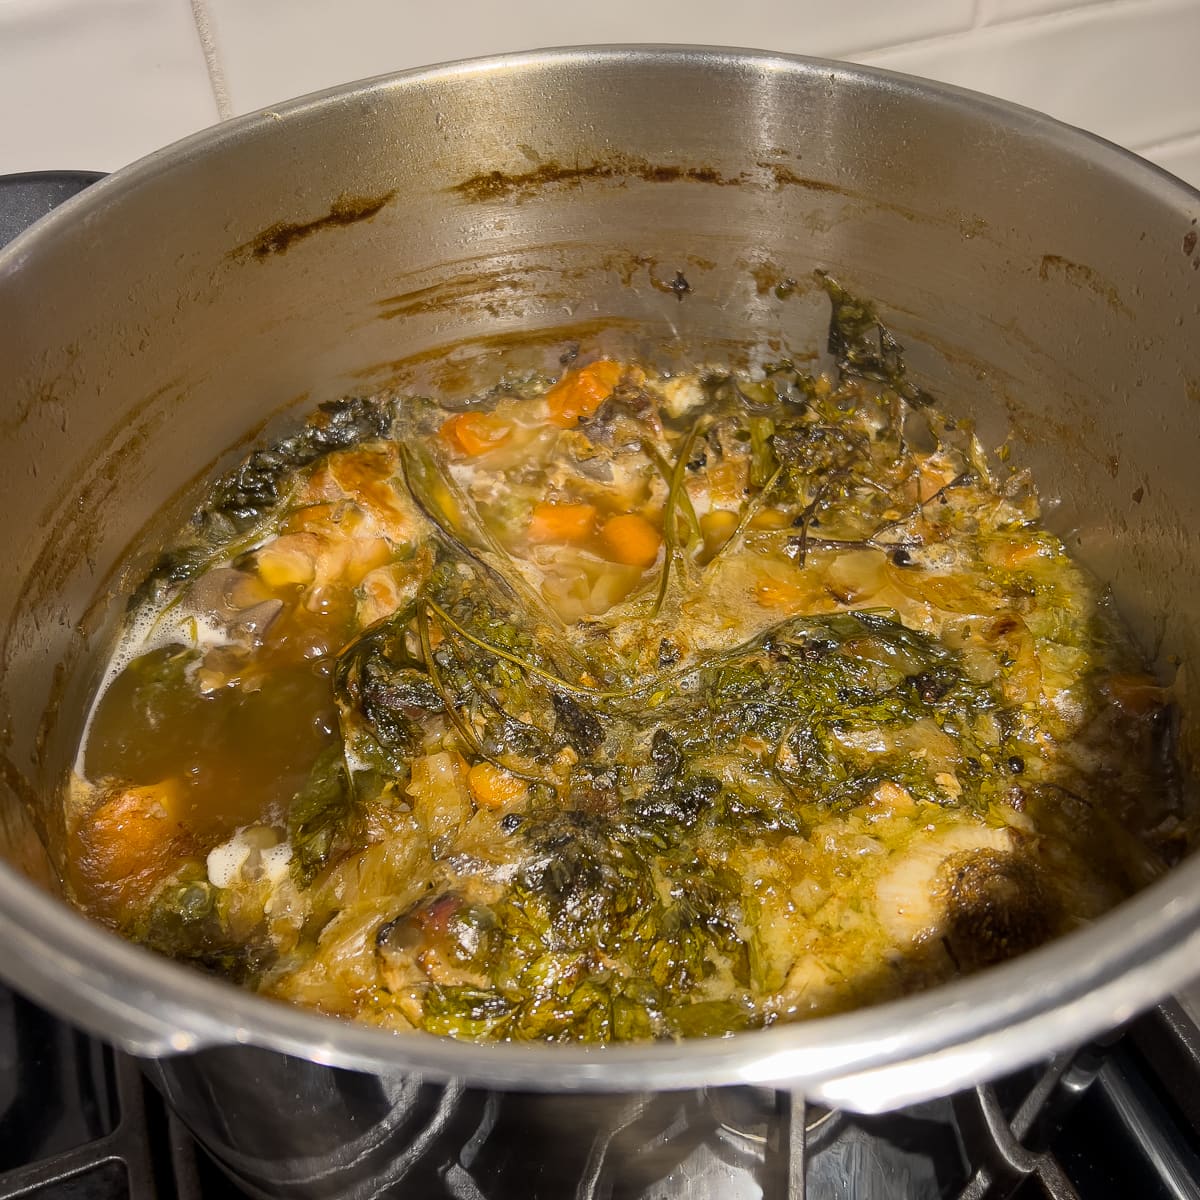 Simmering broth on the stovetop.